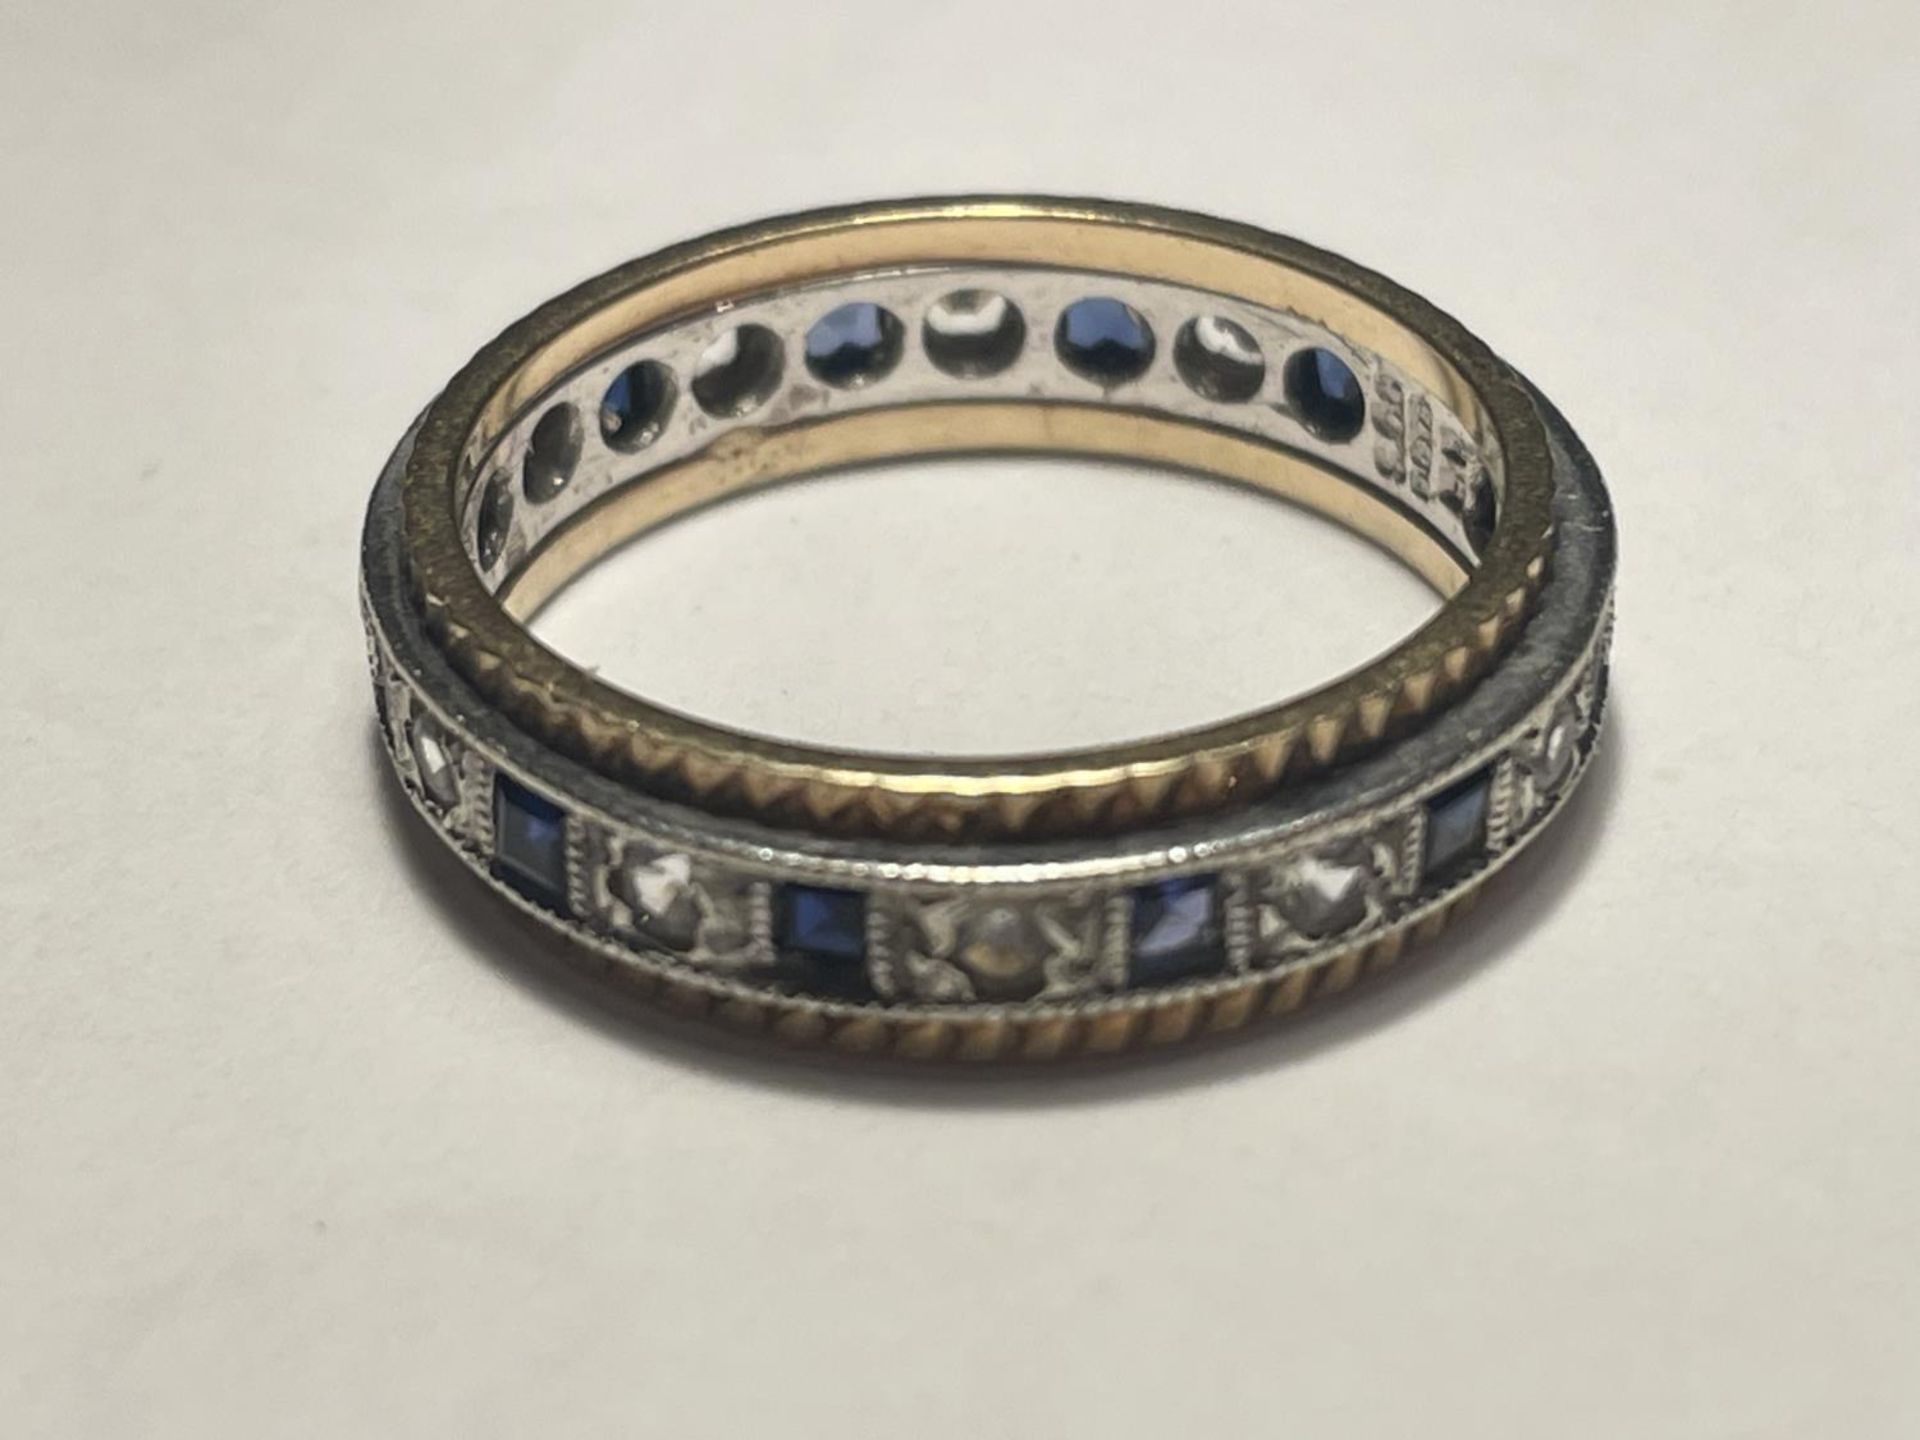 A 9 CARAT GOLD RING WITH A BAND OF SAPPHIRES AND CUBIC ZIRCONIA STONES - Image 2 of 3